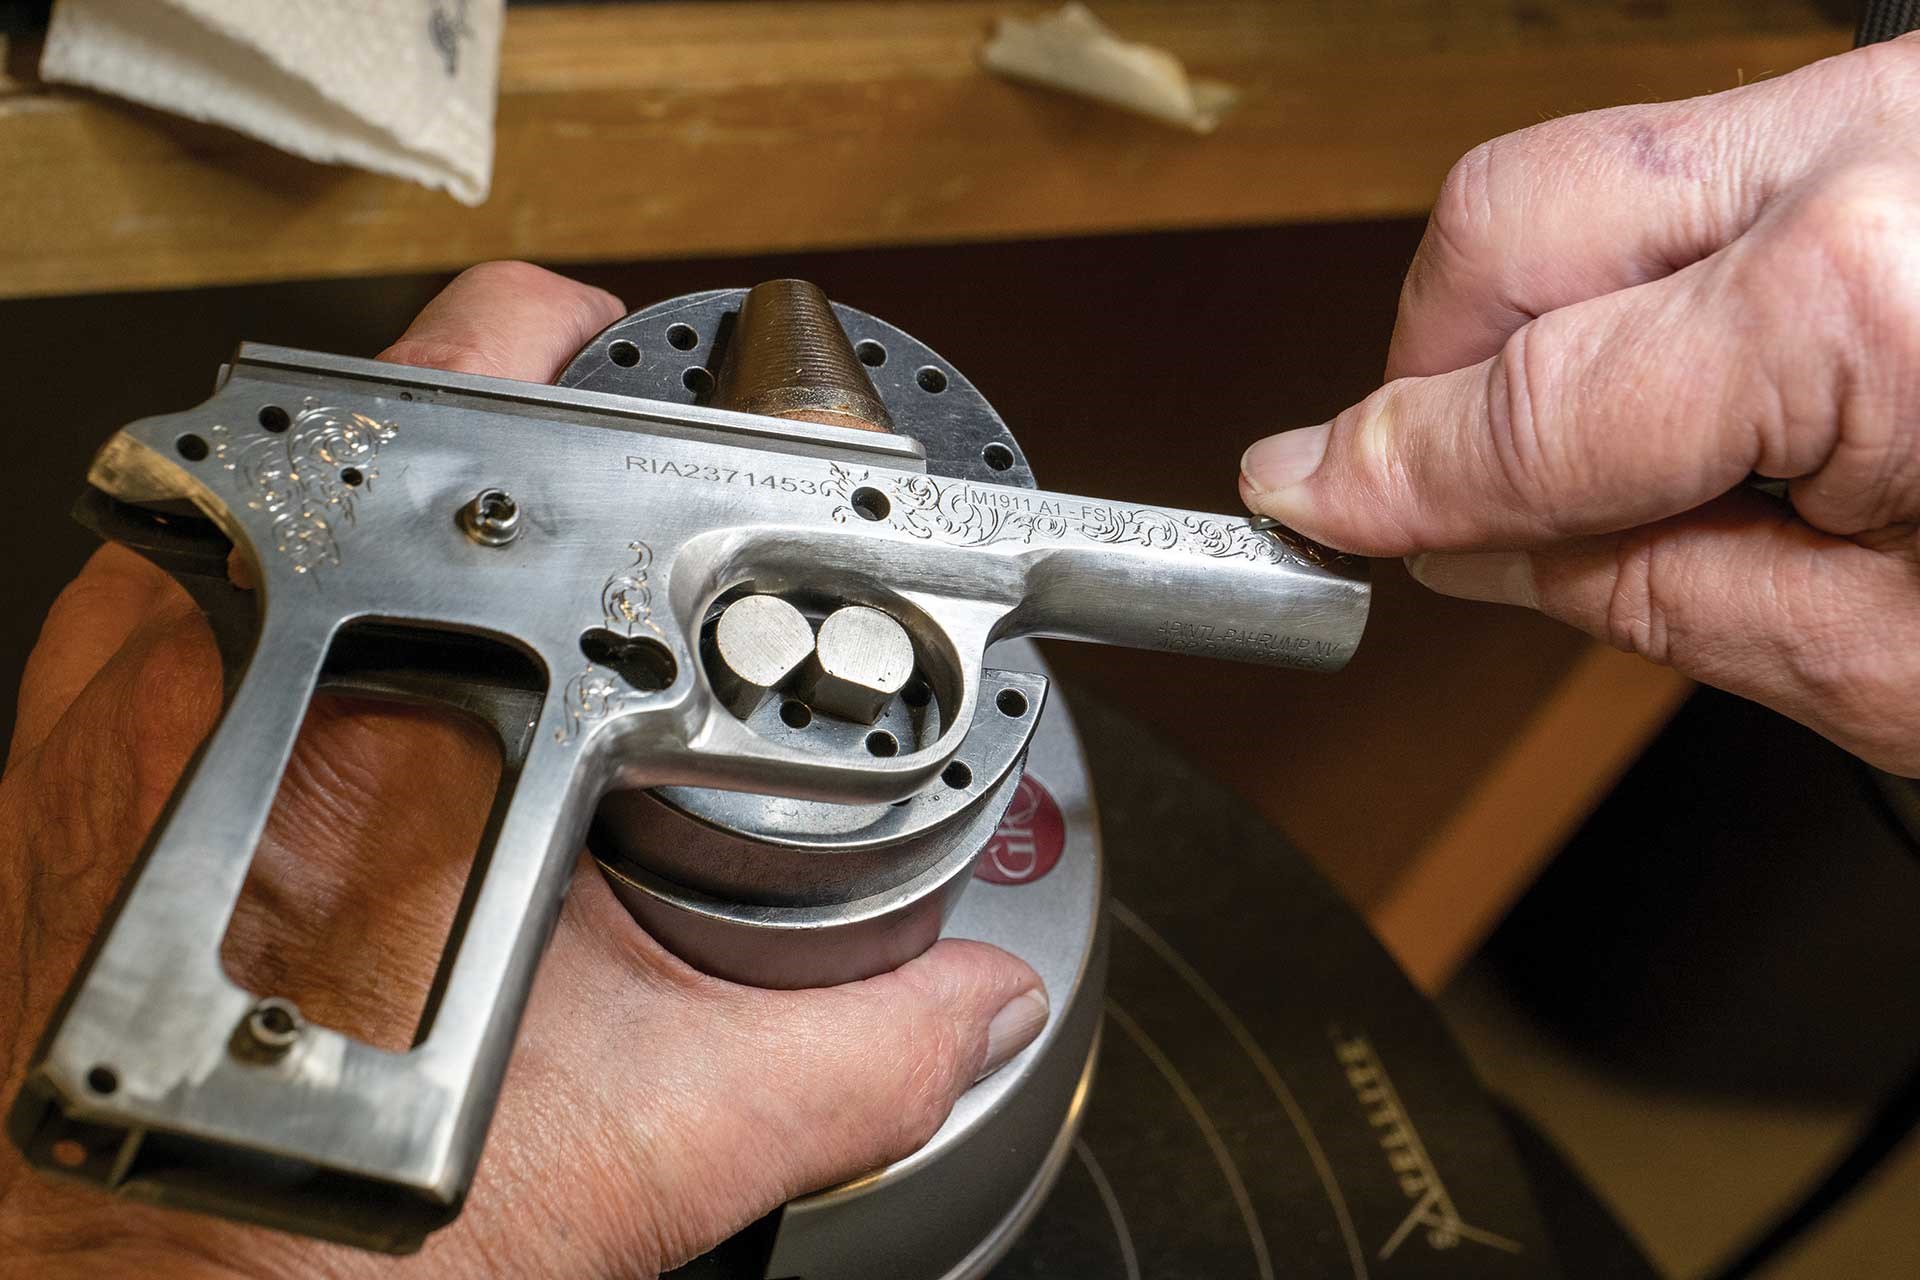 A man works on engraving an M1911 pistol frame.